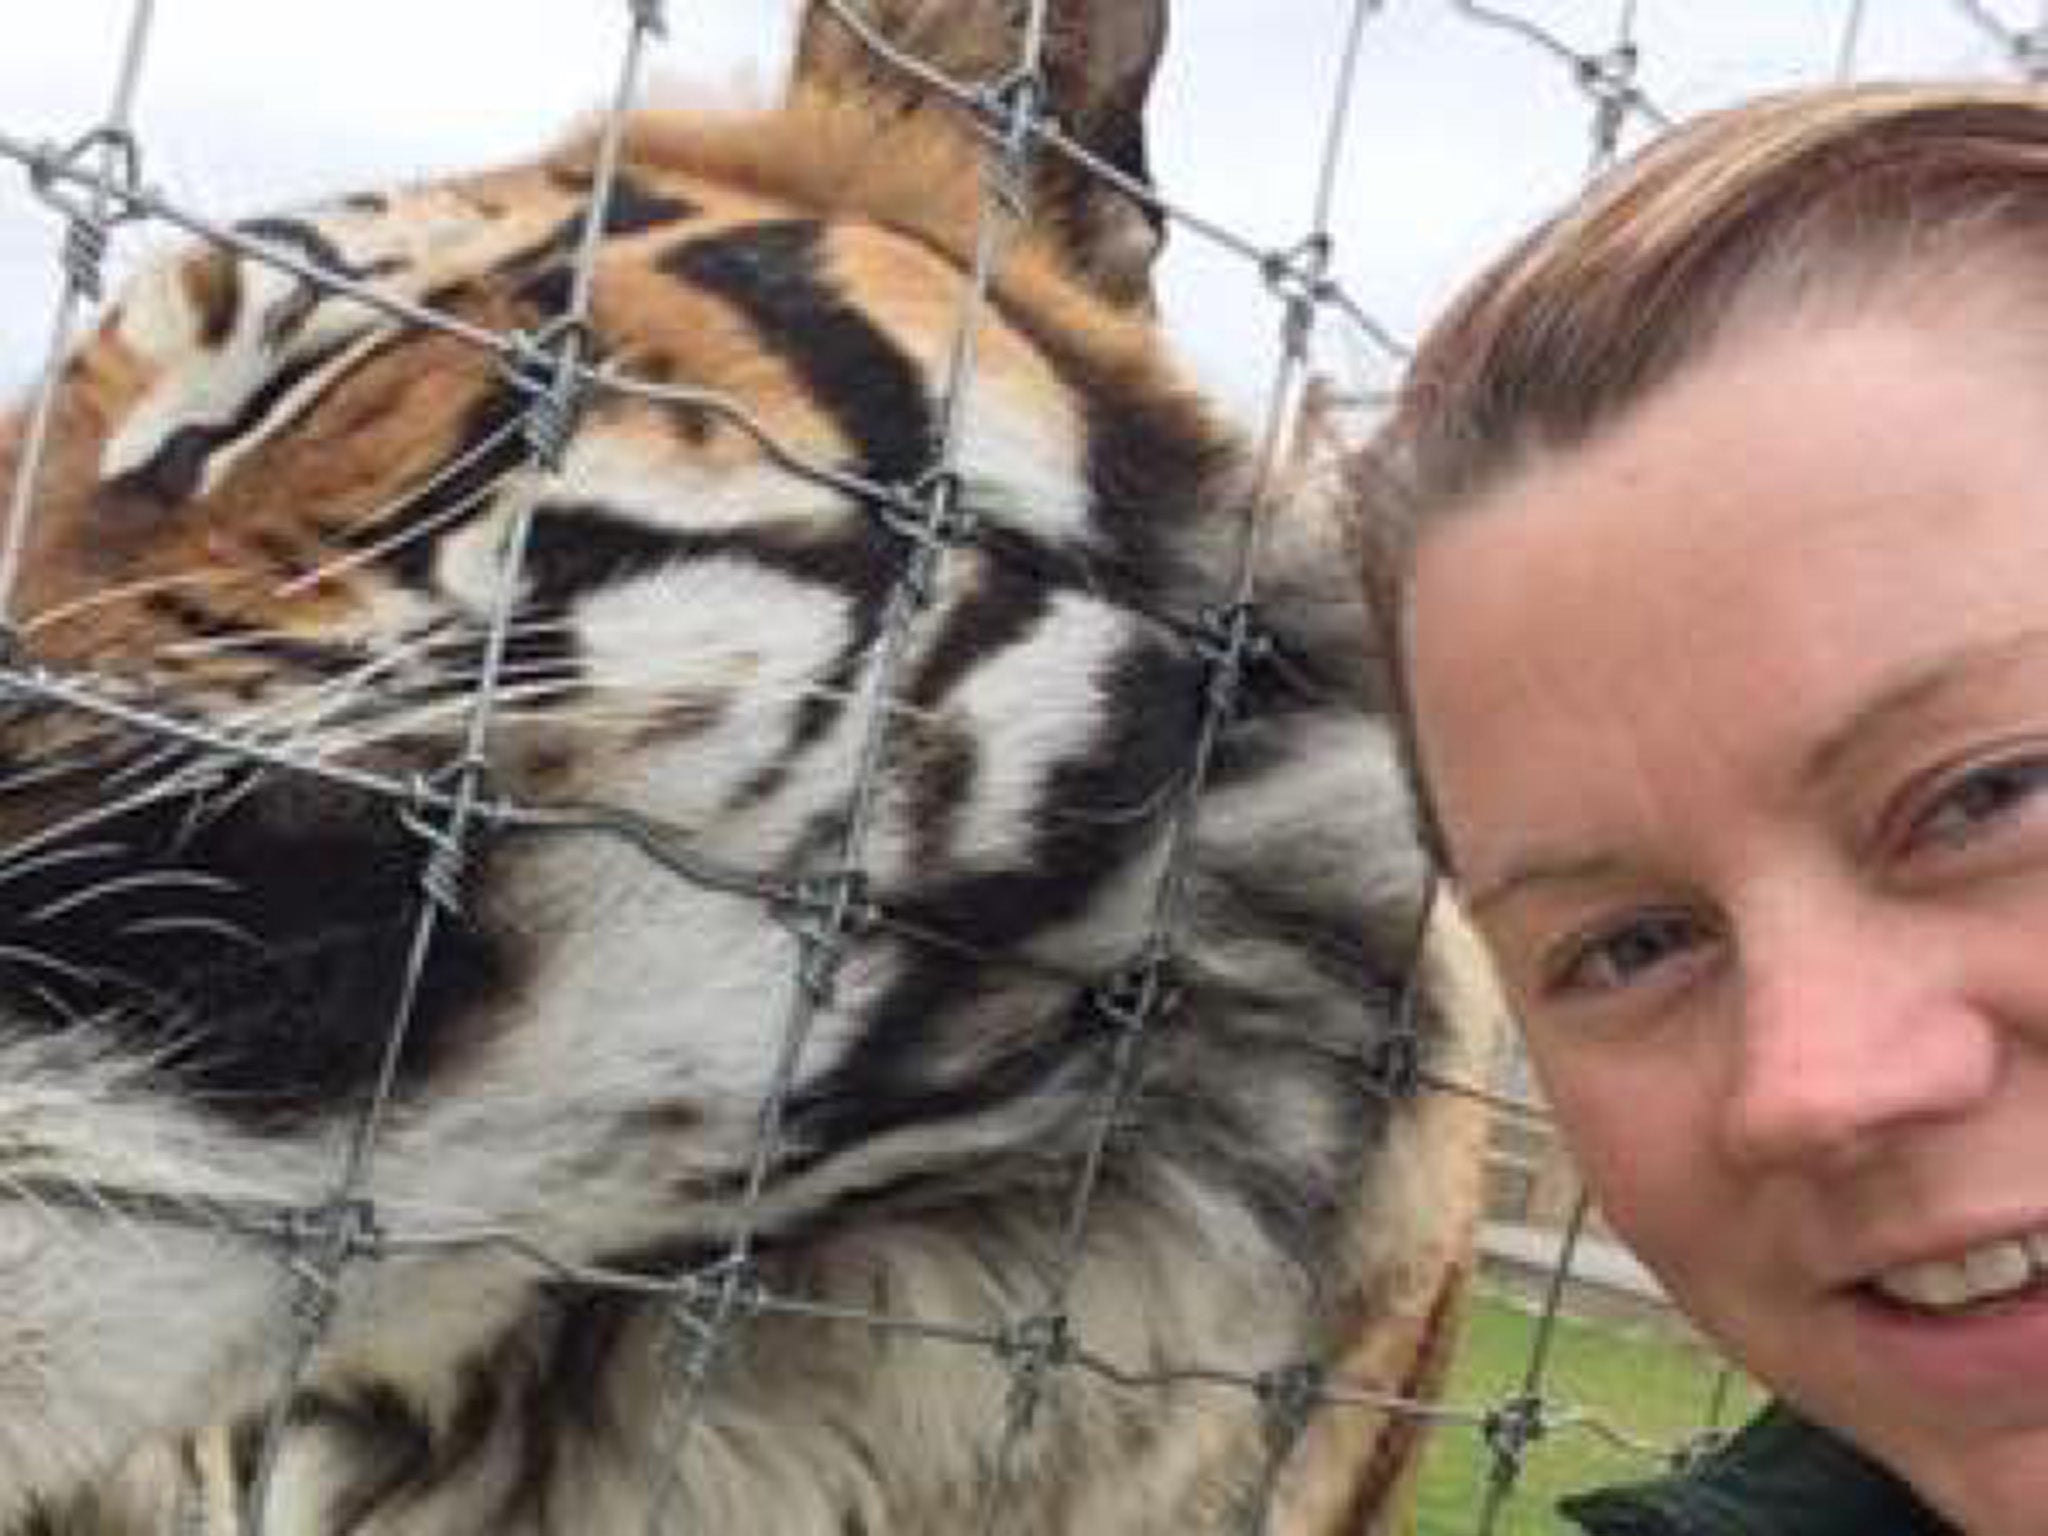 Hamerton zookeeper Rosa King, 34, who was killed by a tiger while on duty at the park